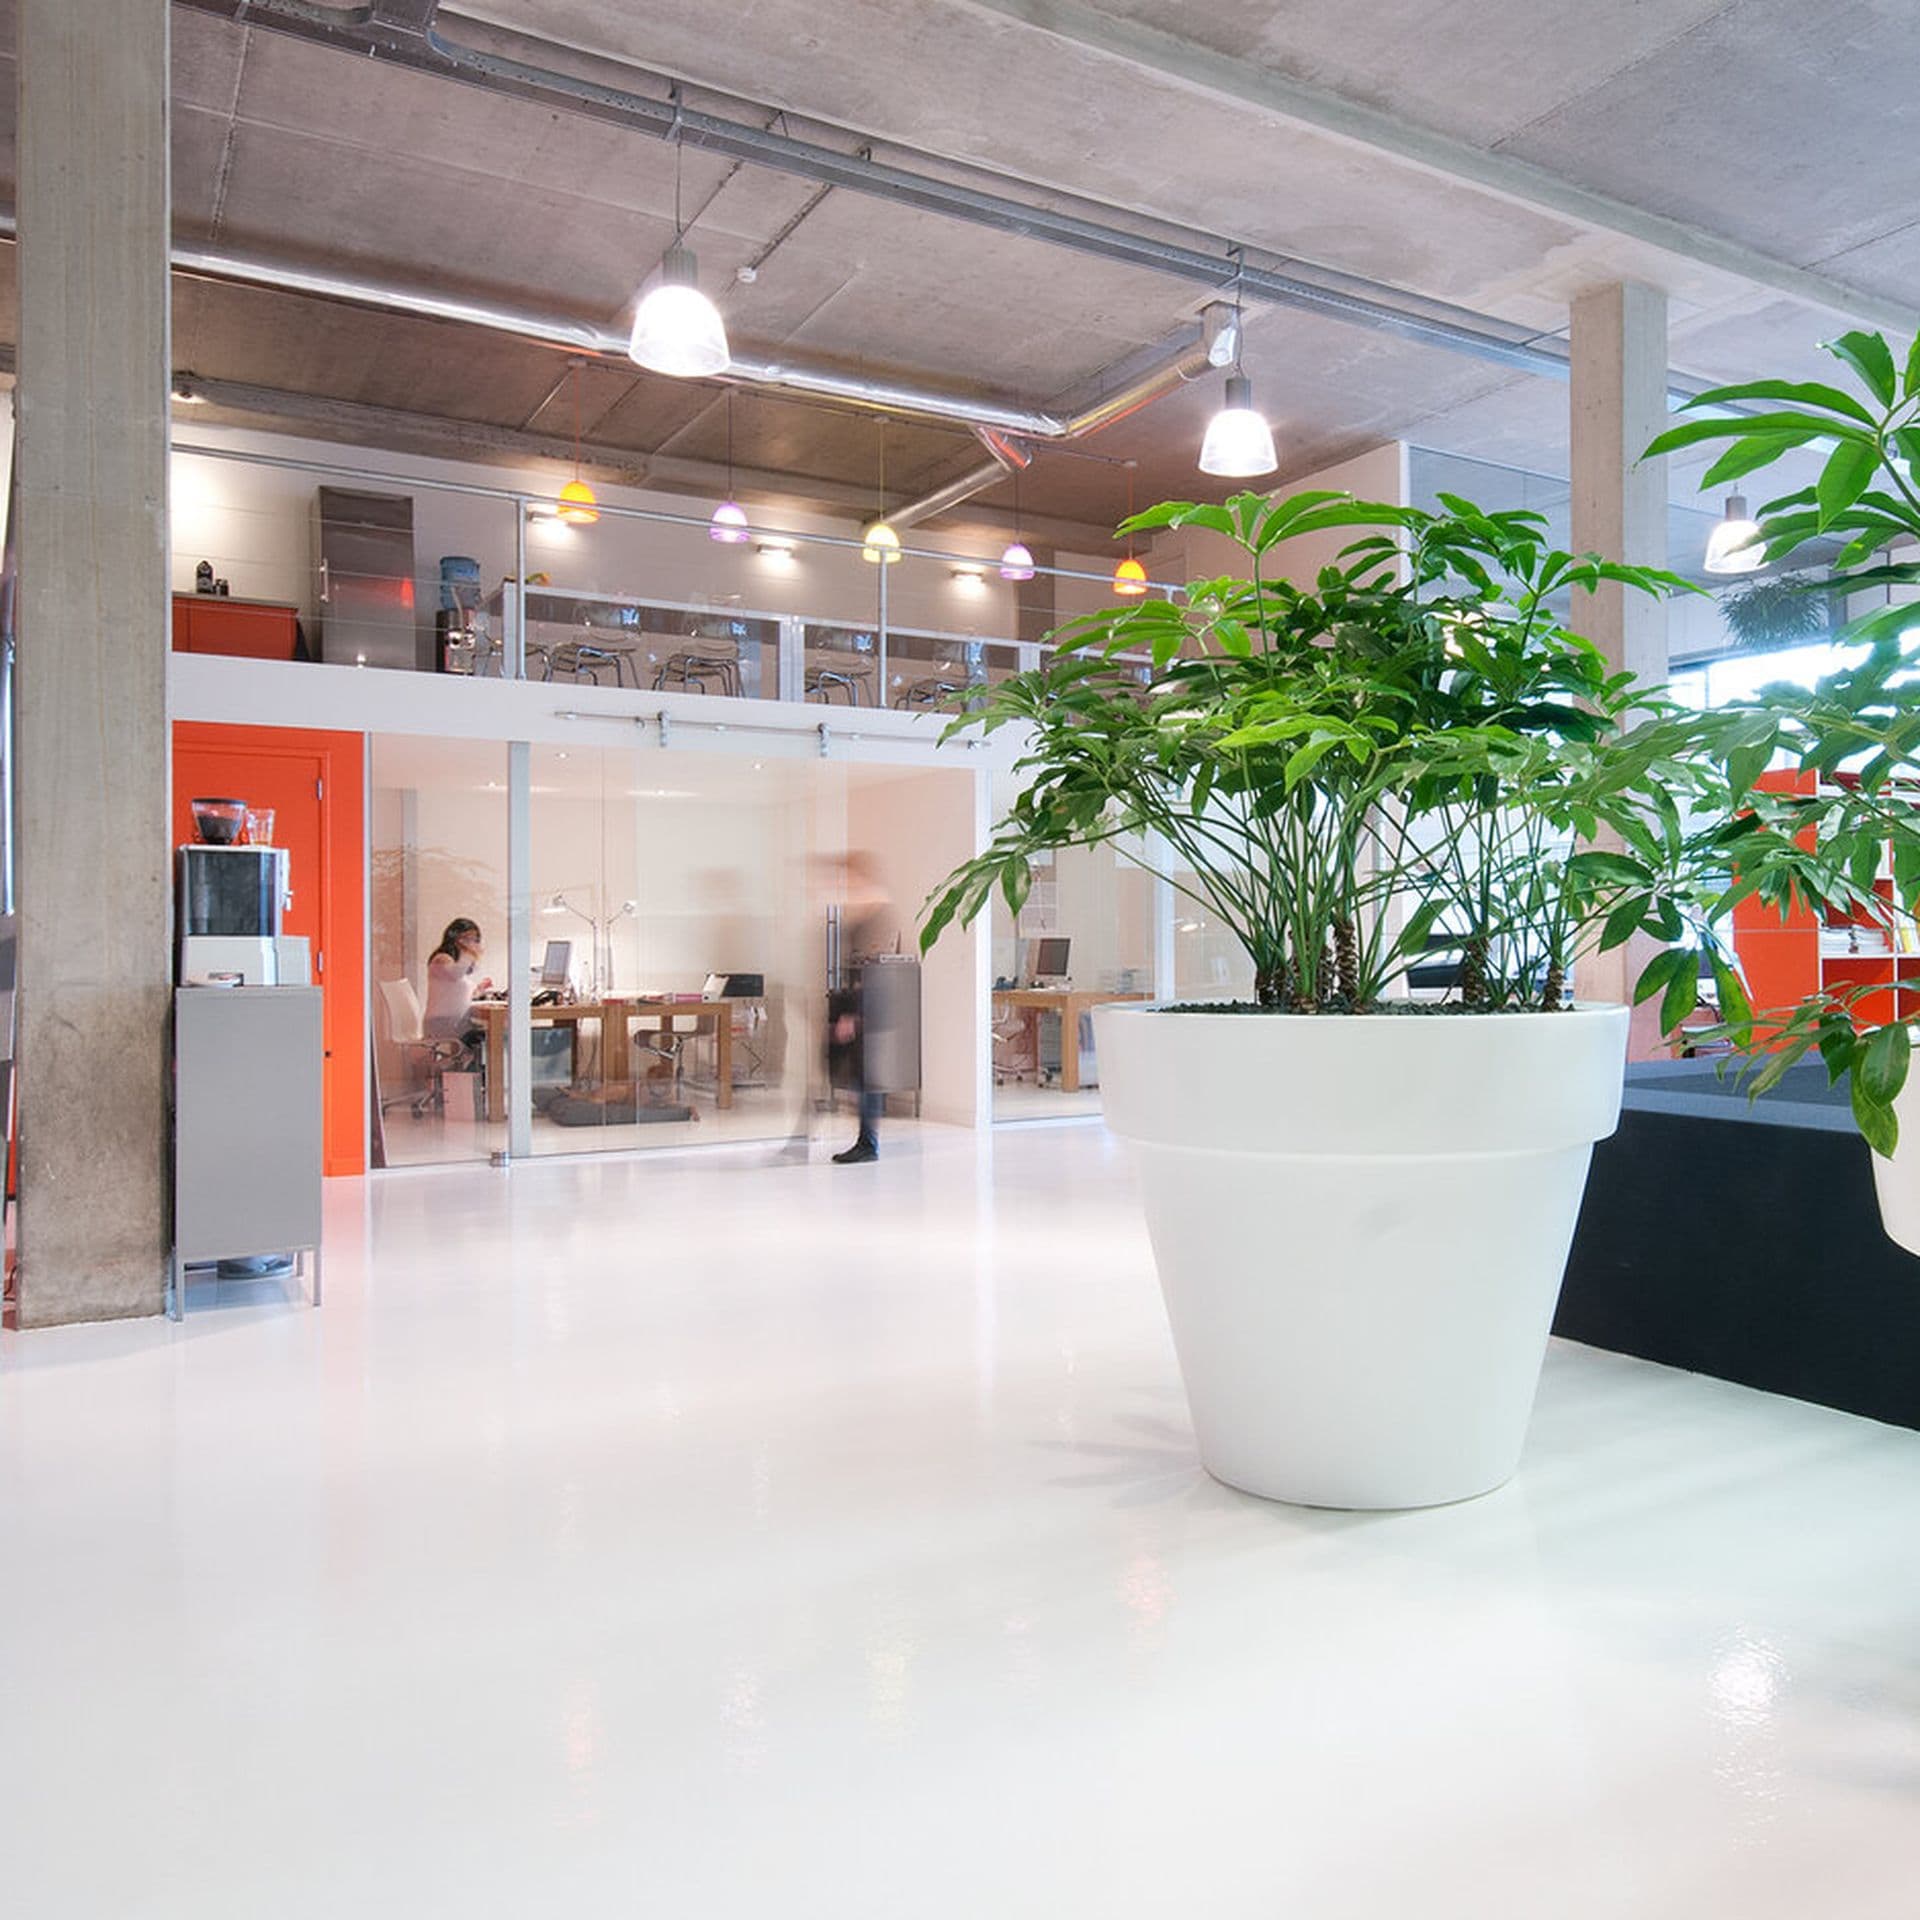 Office with plants